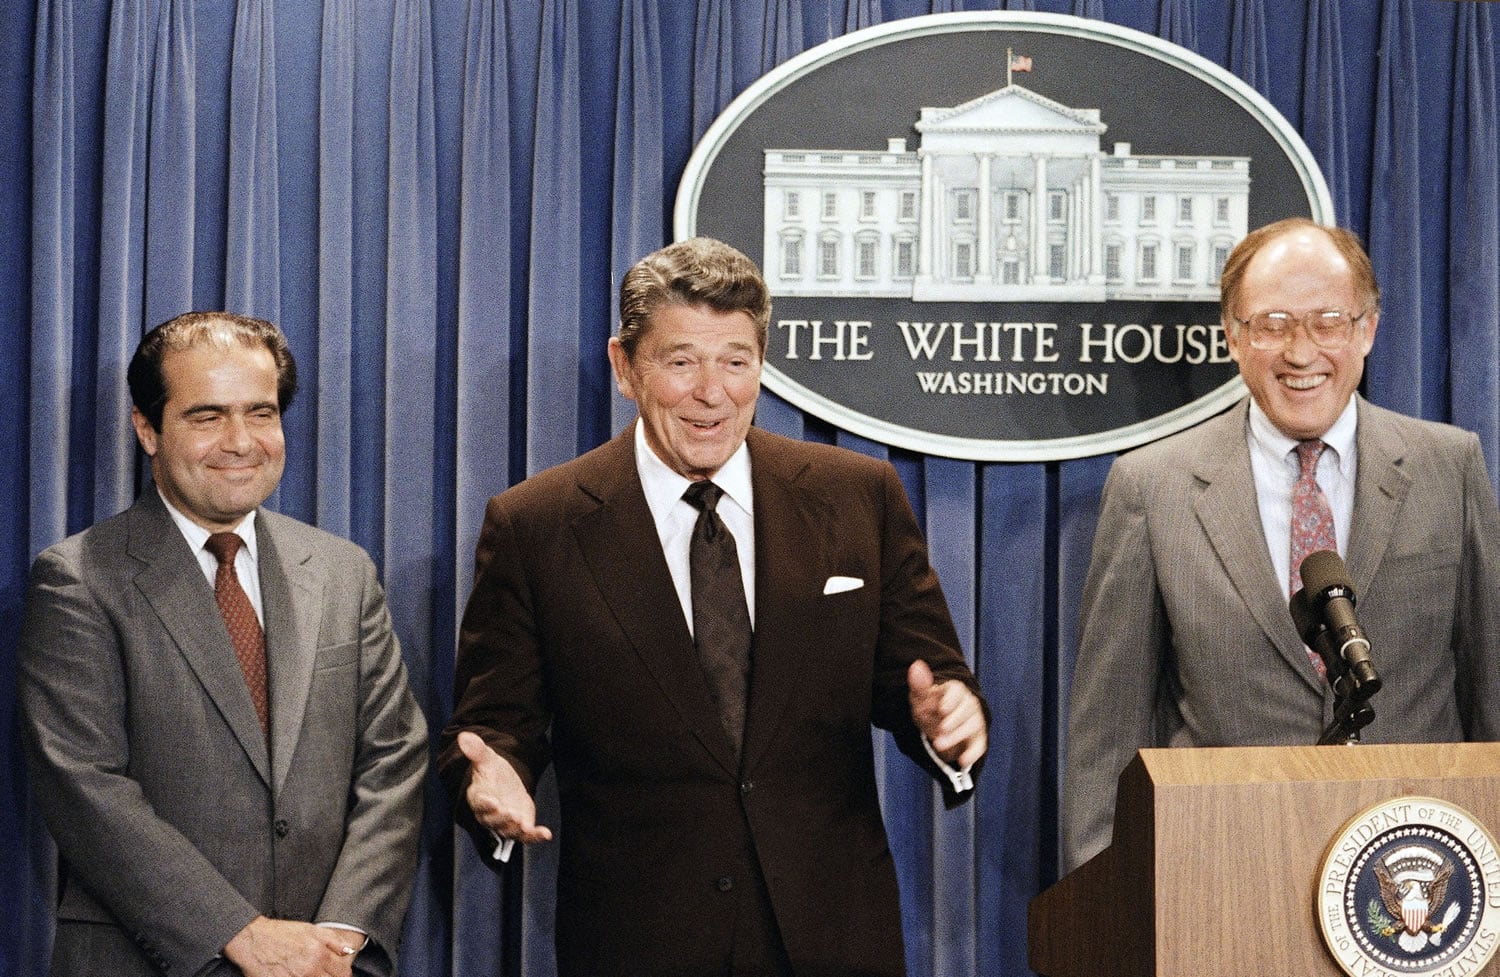 In this June 17, 1986 file photo, President Ronald Reagan speaks at a news briefing at the White House in Washington, where he announced the nomination of Antonin Scalia, left, to the Supreme Court as a result of Chief Justice Warren E. Burger's resignation. William Rehnquist is at right. On Saturday, Feb. 13, 2016, the U.S. Marshals Service confirmed that Justice Scalia has died at the age of 79.